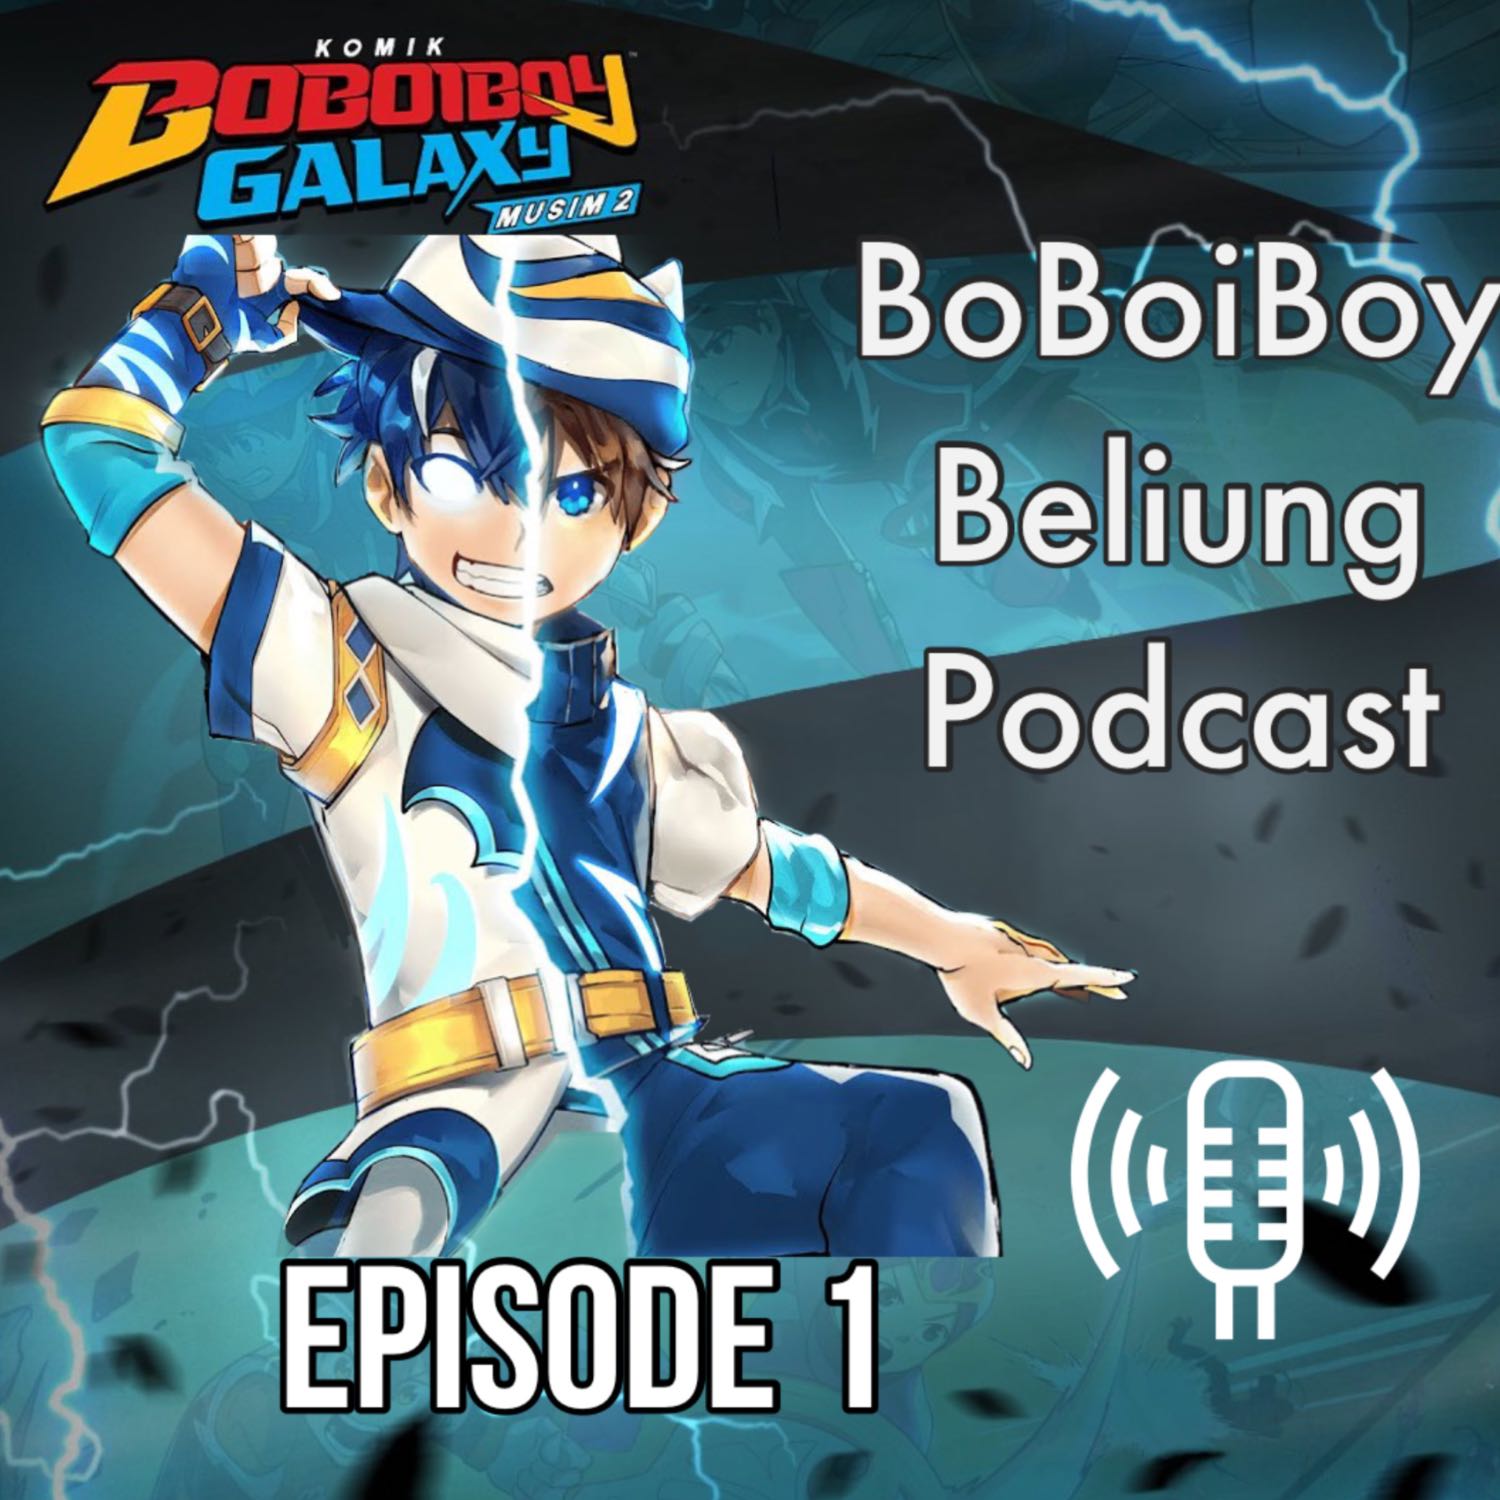 Terbaik Podcast #1 - BoBoiBoy Beliung Quick Overview